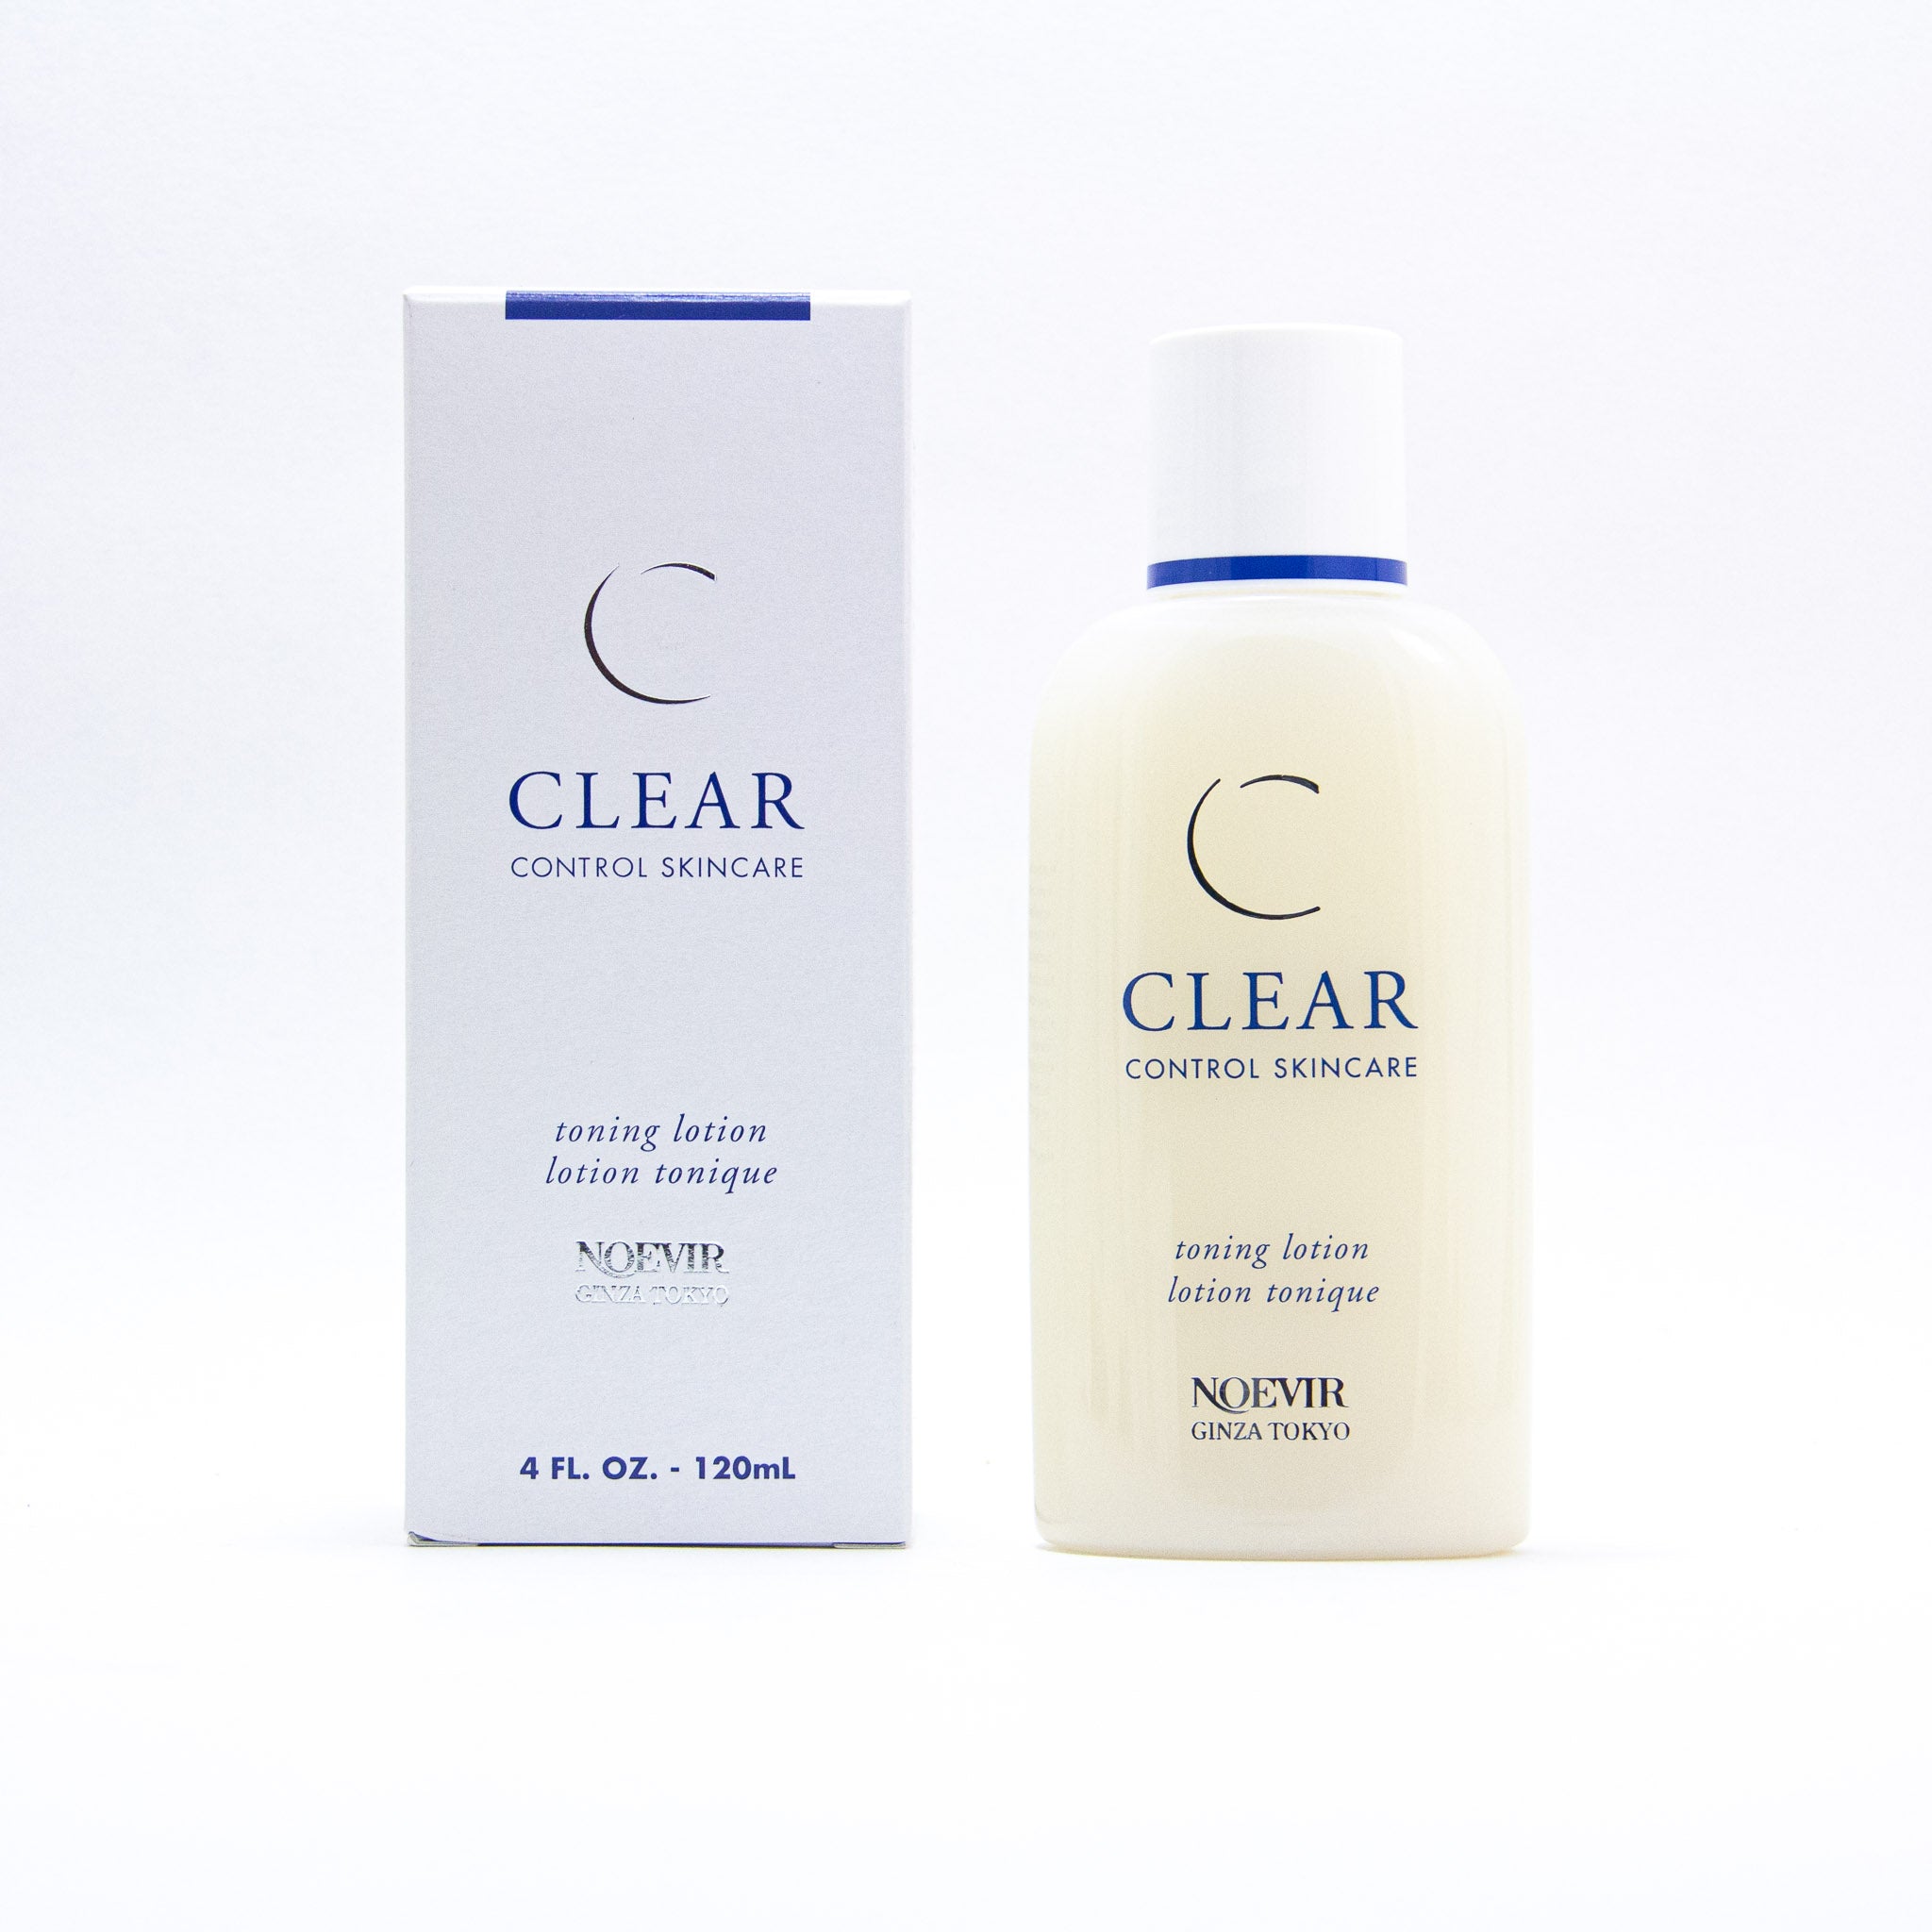 Noevir Clear Control Toning Lotion, 4 fl oz:   The Toning Lotion contains zinc oxide, with bacteria-fighting astringent qualities to promote a clearer complexion. Exfoliates, clarifies and controls shine to help minimize blemishes. 